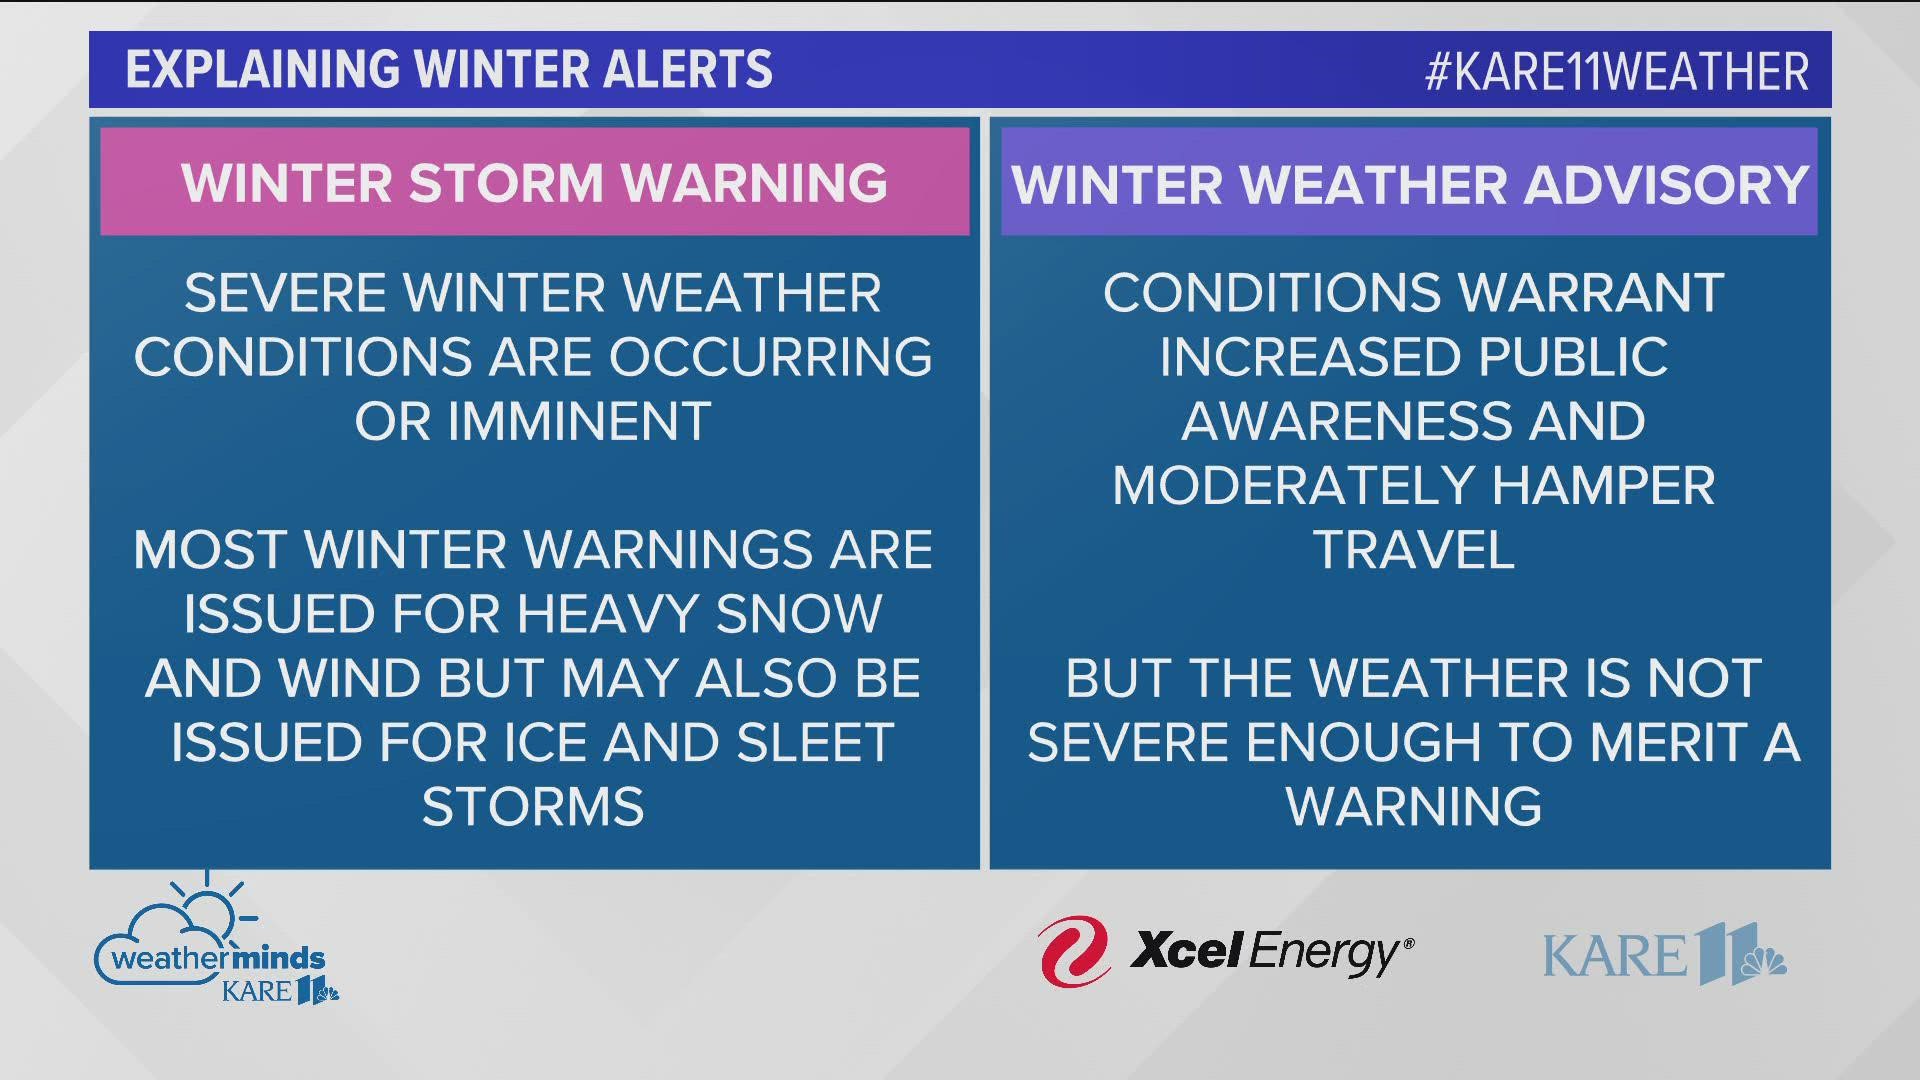 A winter storm warning means conditions are imminent, whereas a winter weather advisory signals that conditions will moderately hamper travel.